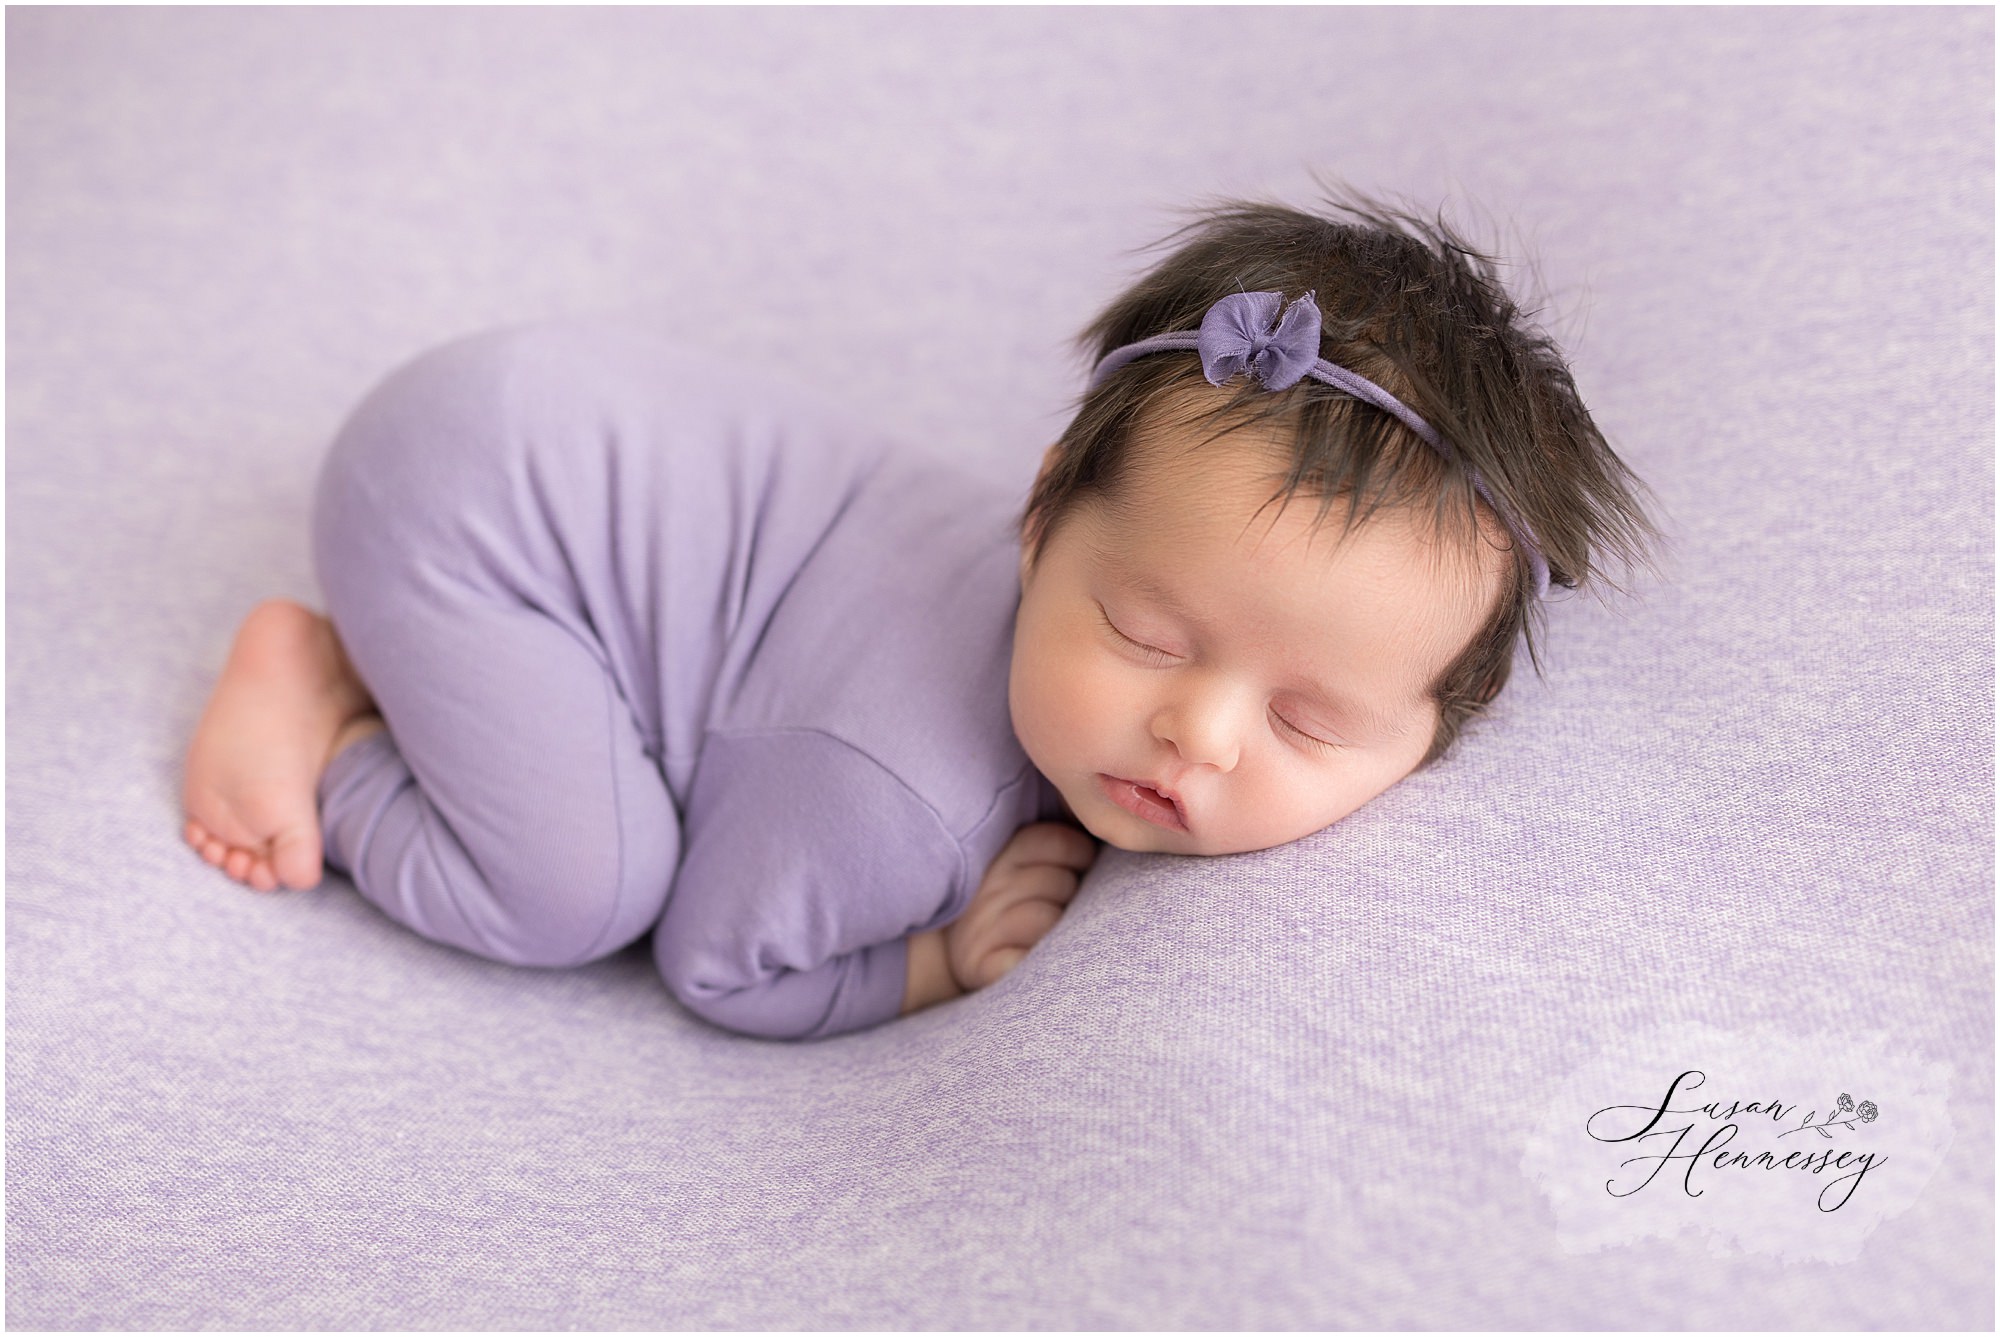 Susan Hennessey Photography is an In Studio Newborn Photographer located in Moorestown, NJ